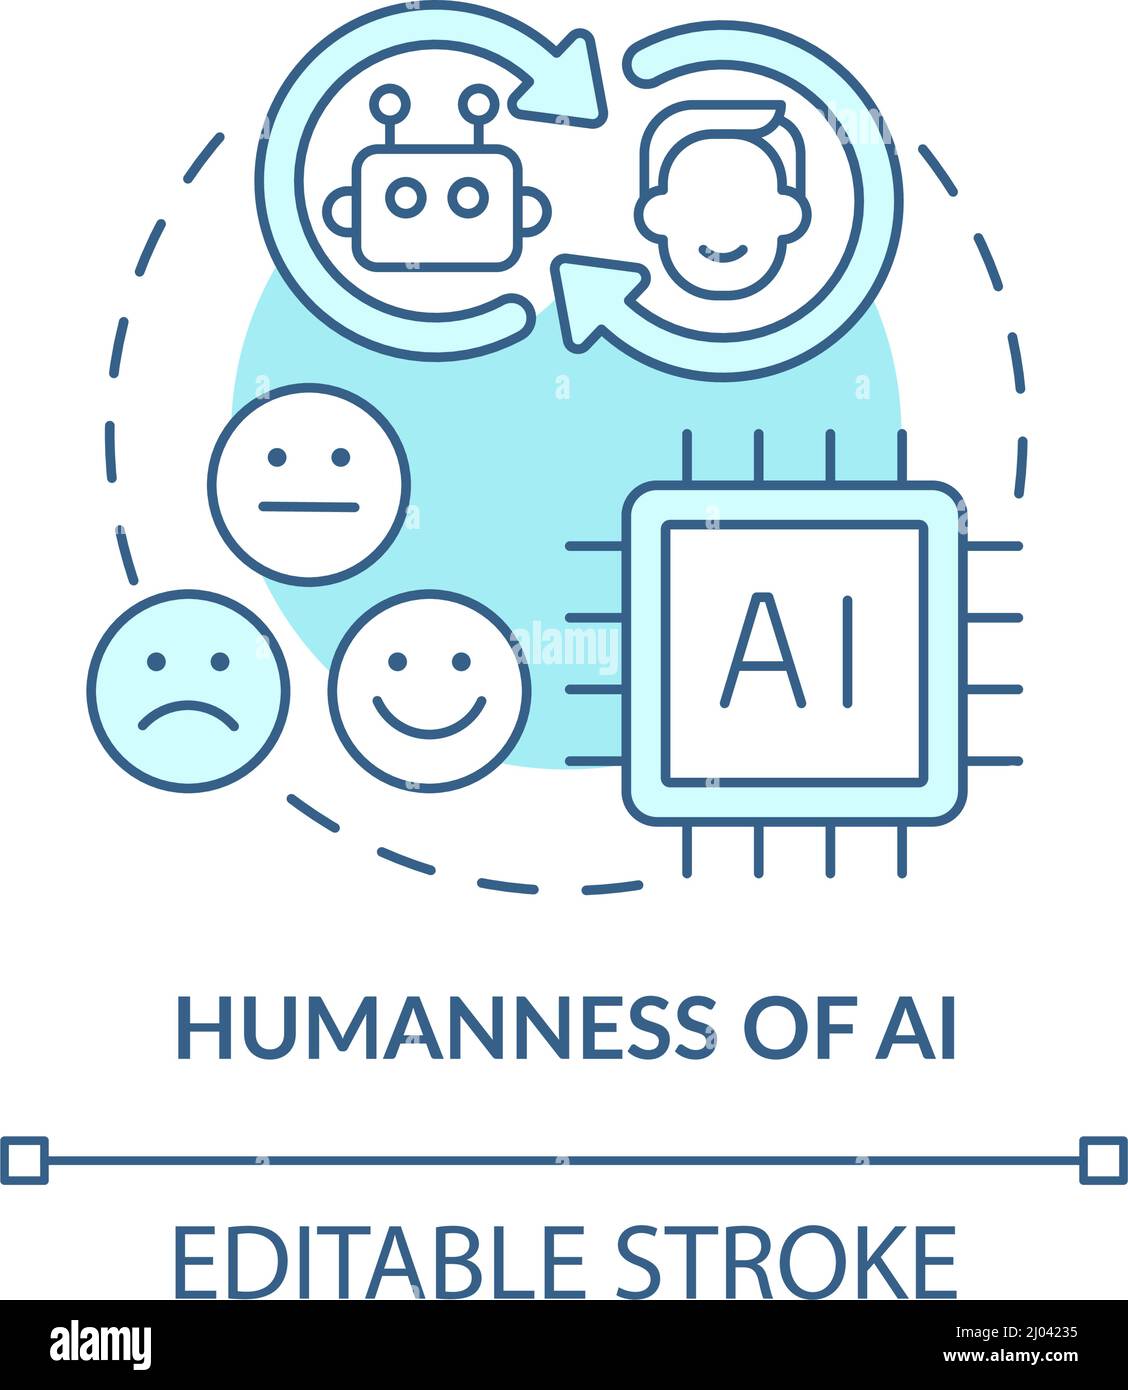 Humanness of AI turquoise concept icon Stock Vector